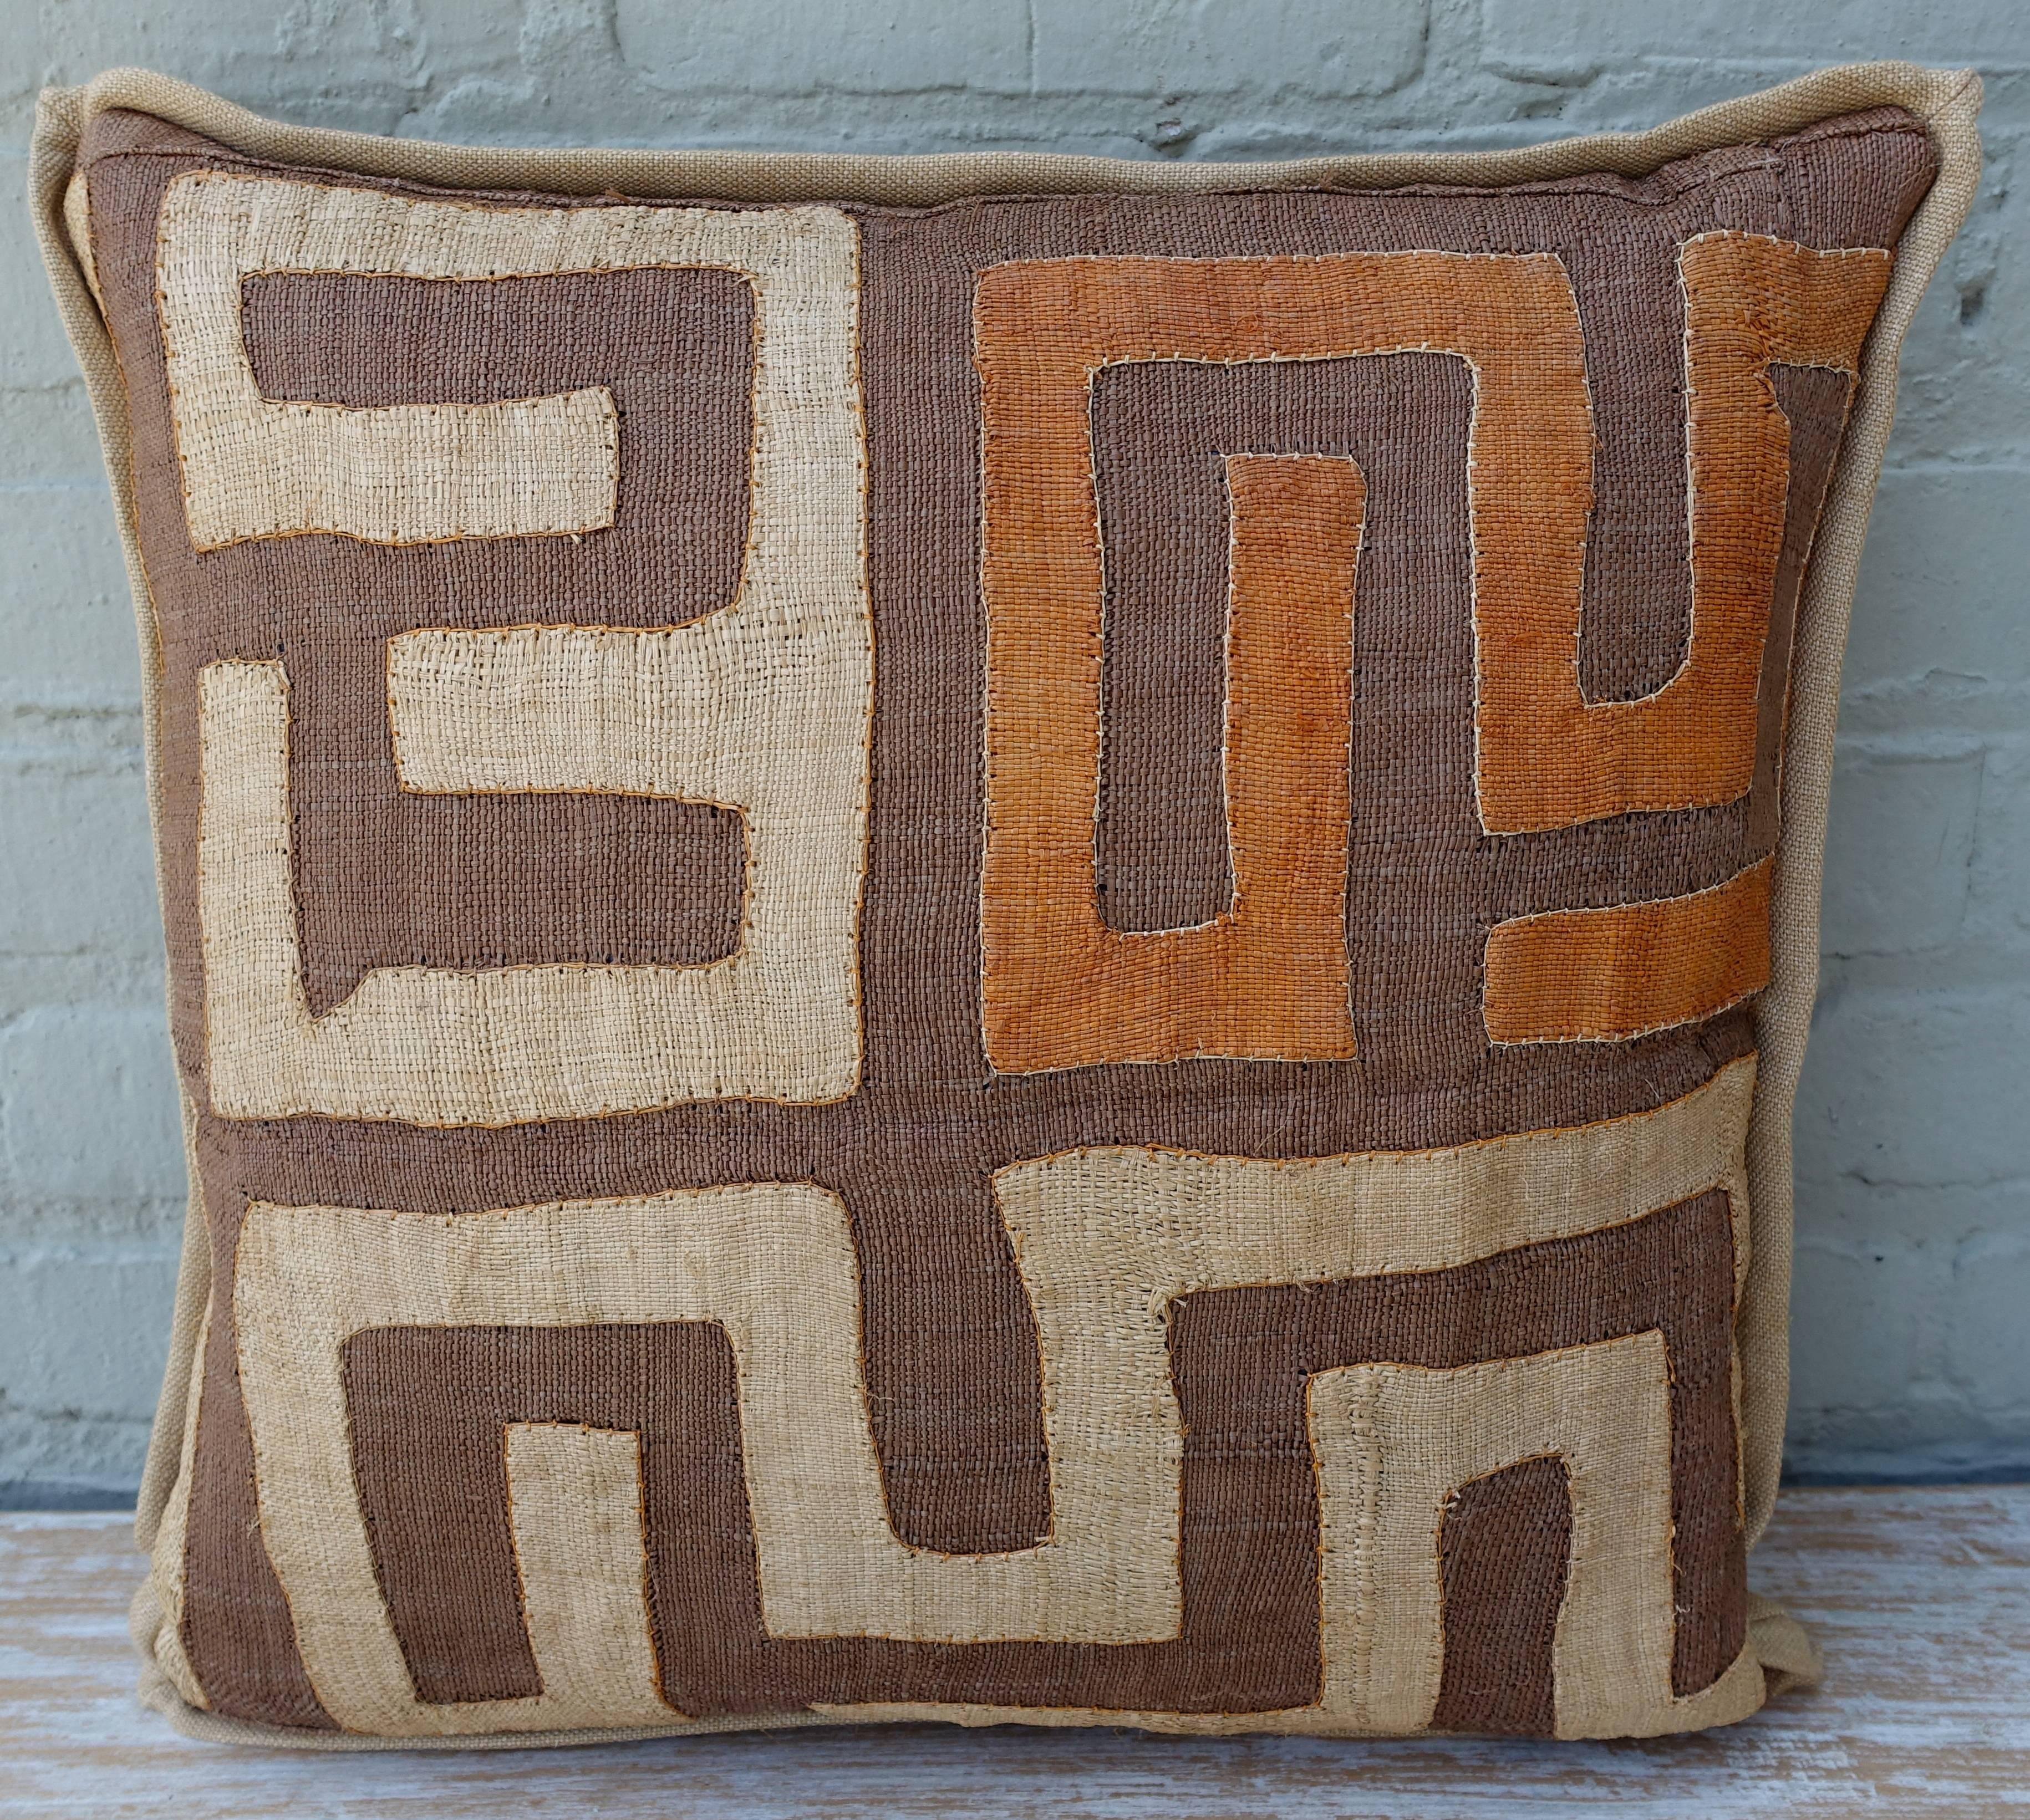 Indian Brown, Wheat and Orange Colored Kuba Cloth Pillows, Pair